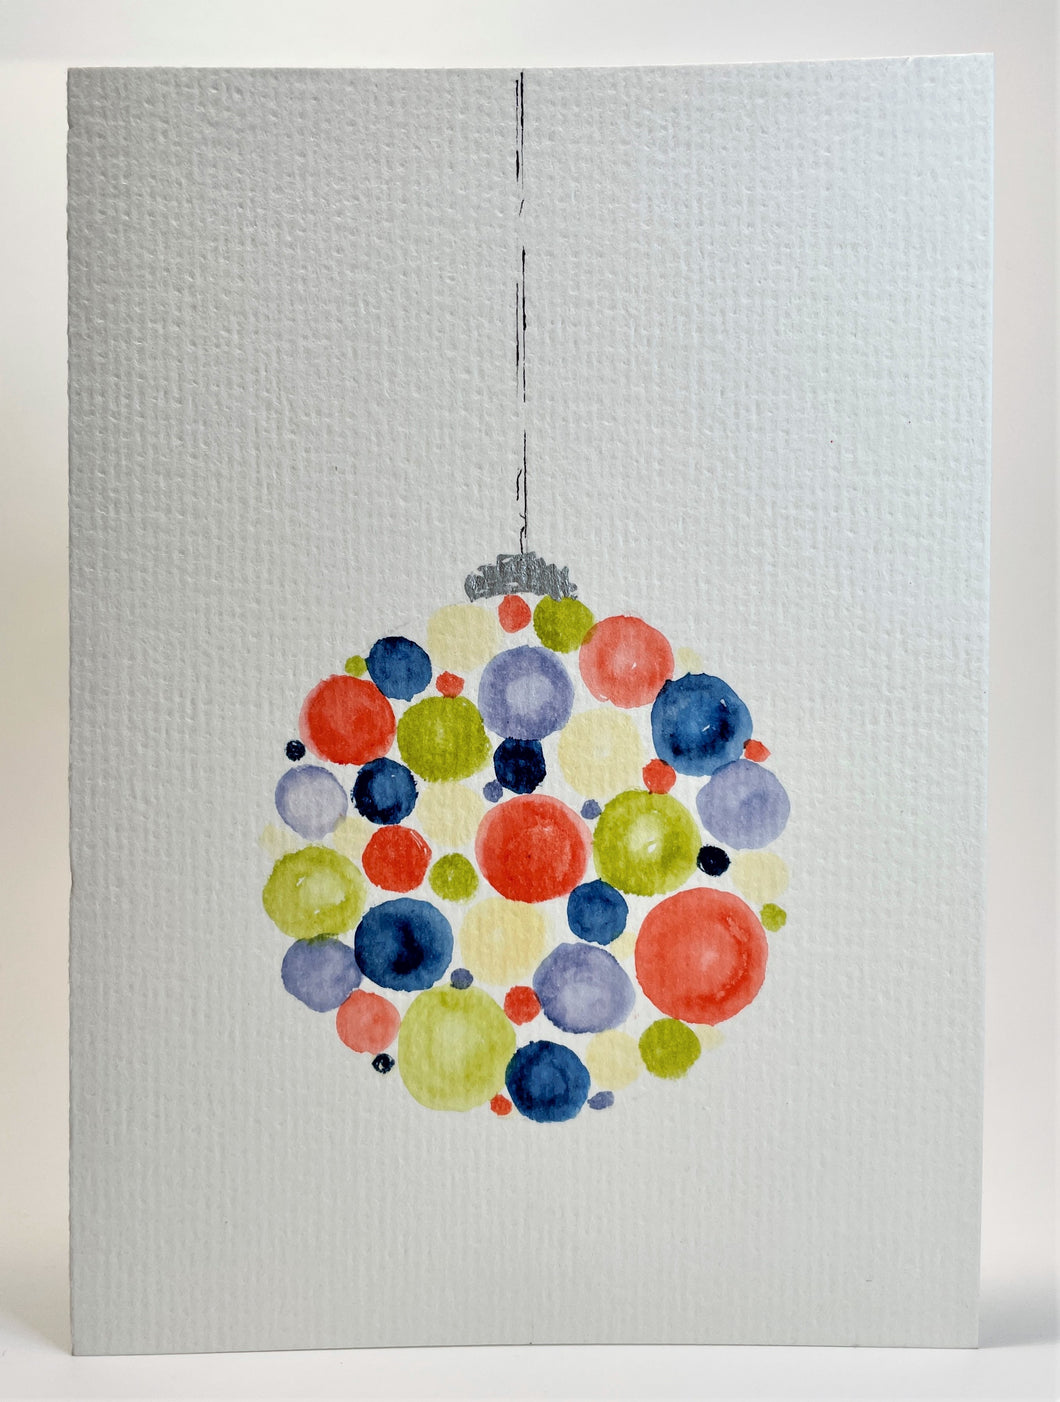 Muted Multicolour Circle Bauble - Hand Painted Christmas Card